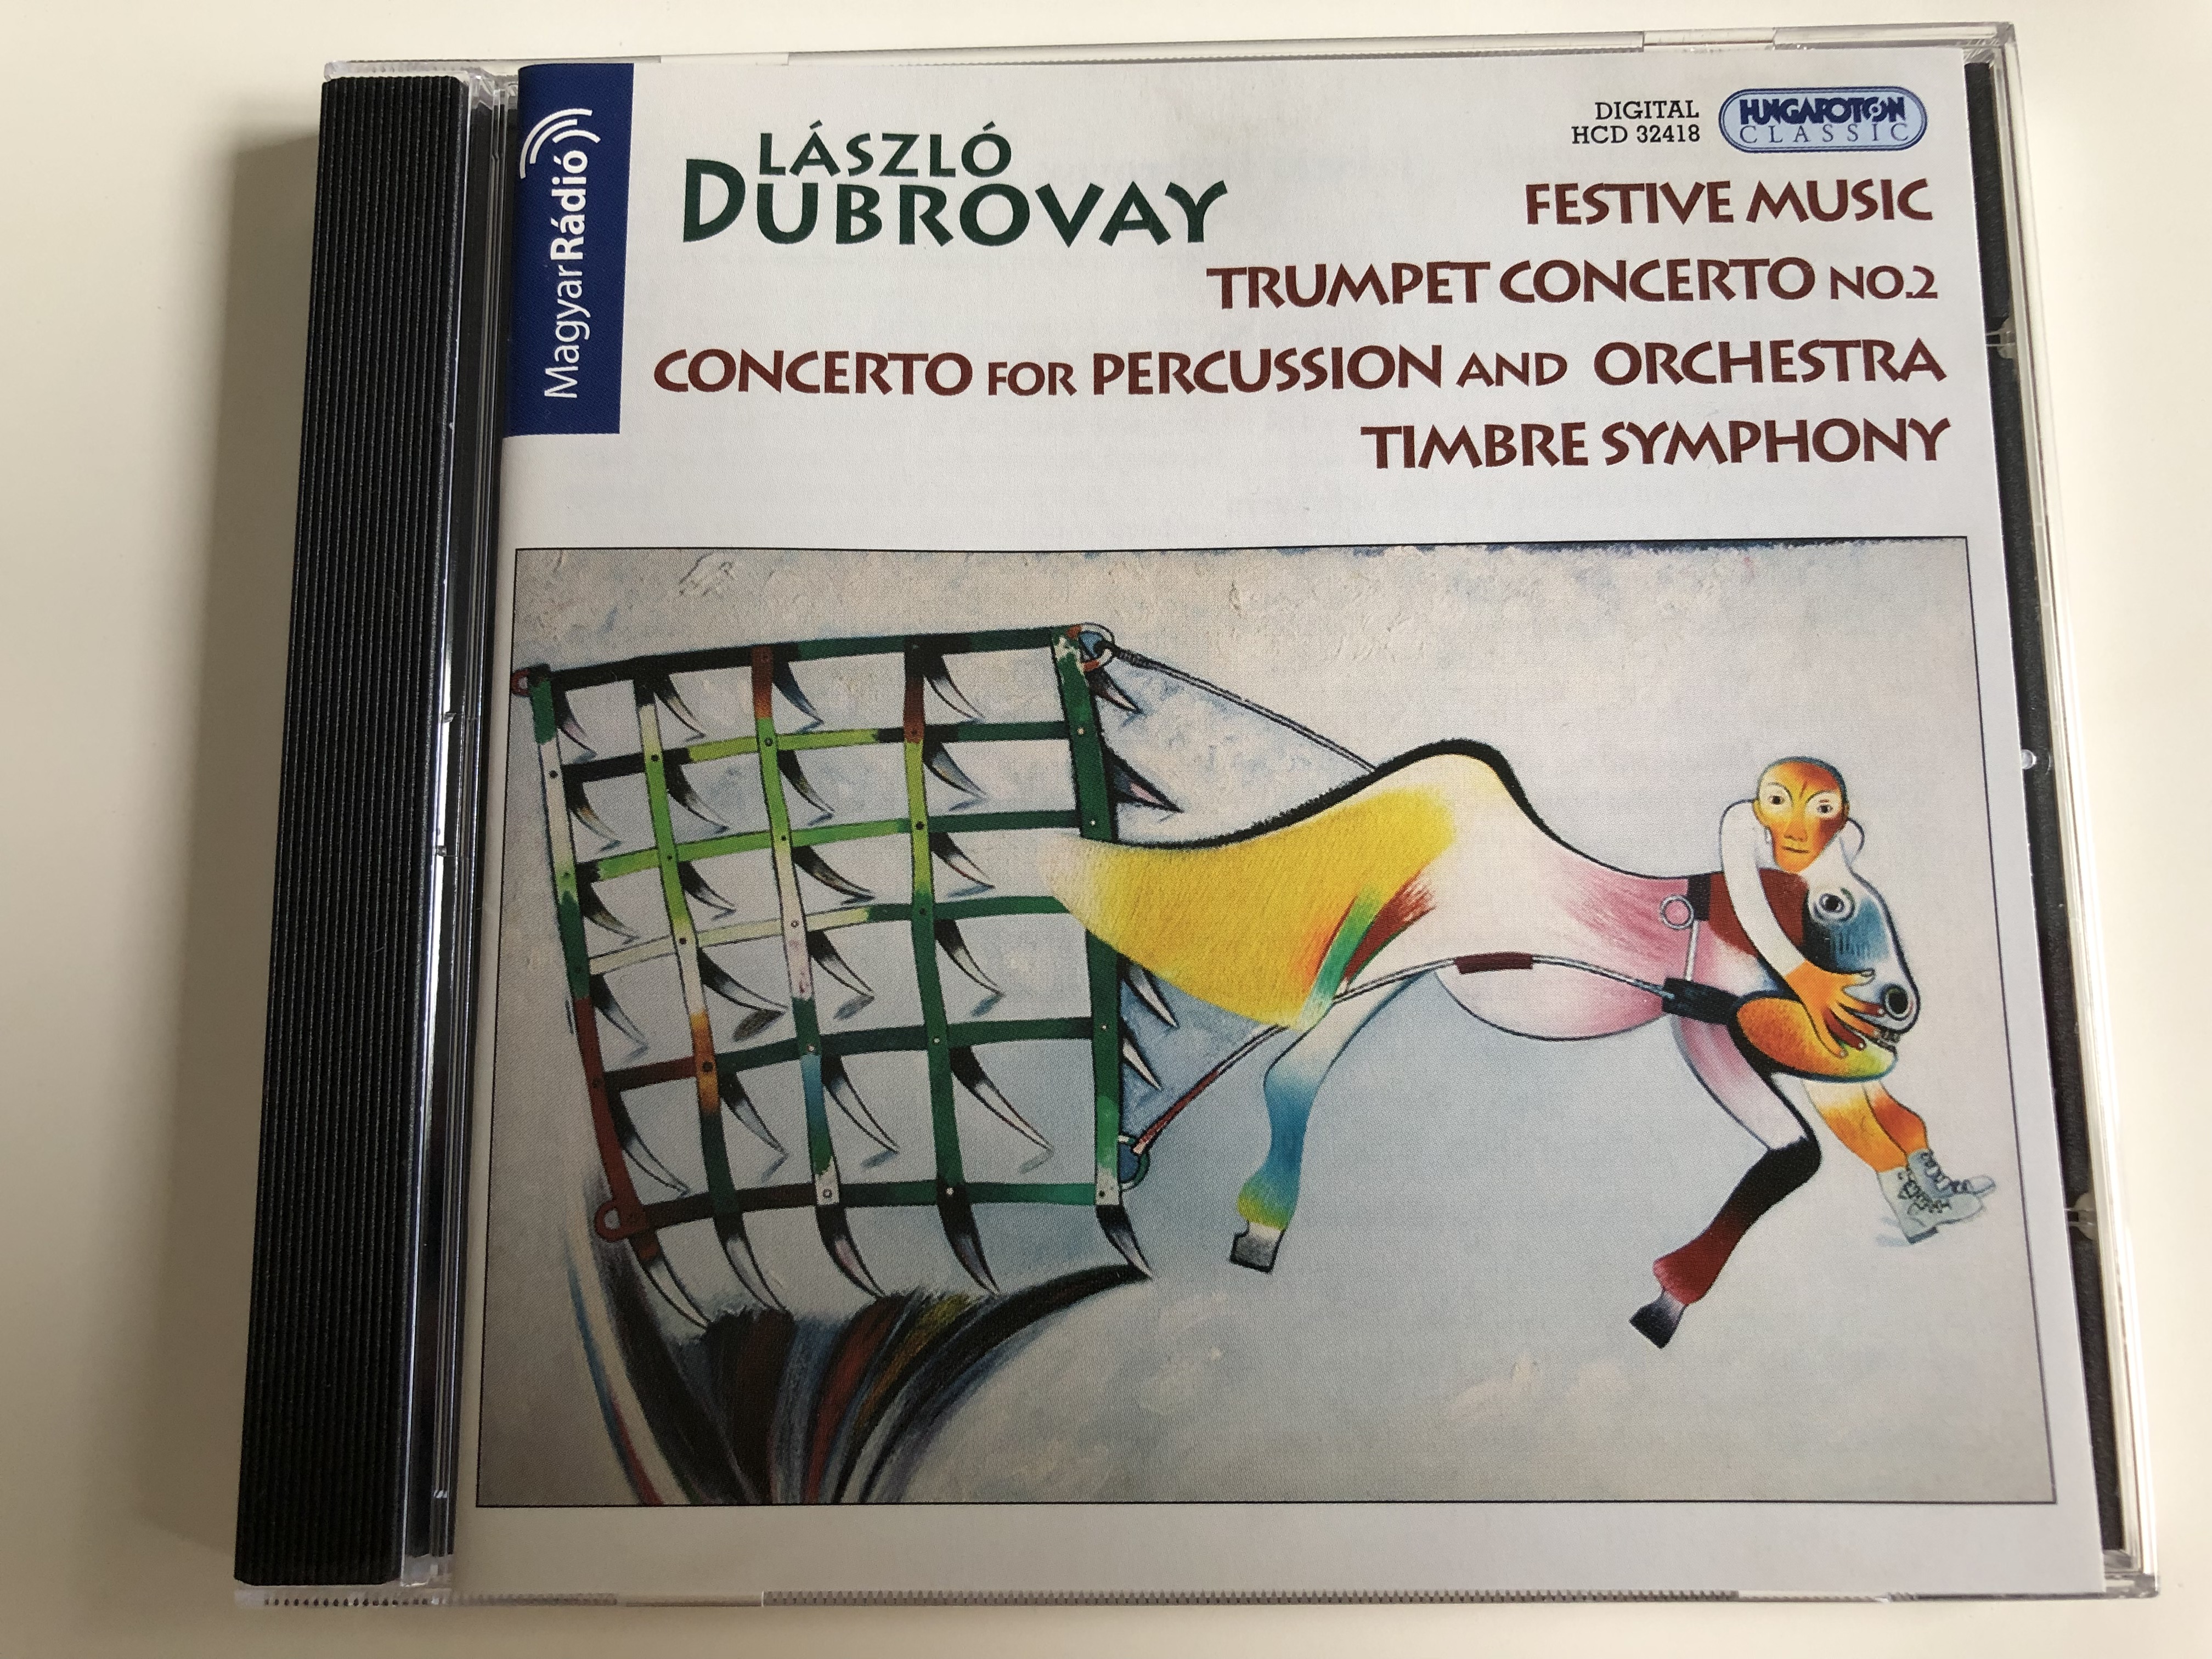 l-szl-dubrovay-festive-music-trumpet-concerto-no.-2-concerto-for-percussion-and-orchestra-timbre-symphony-audio-cd-2007-hungaroton-classic-hcd-32418-1-.jpg